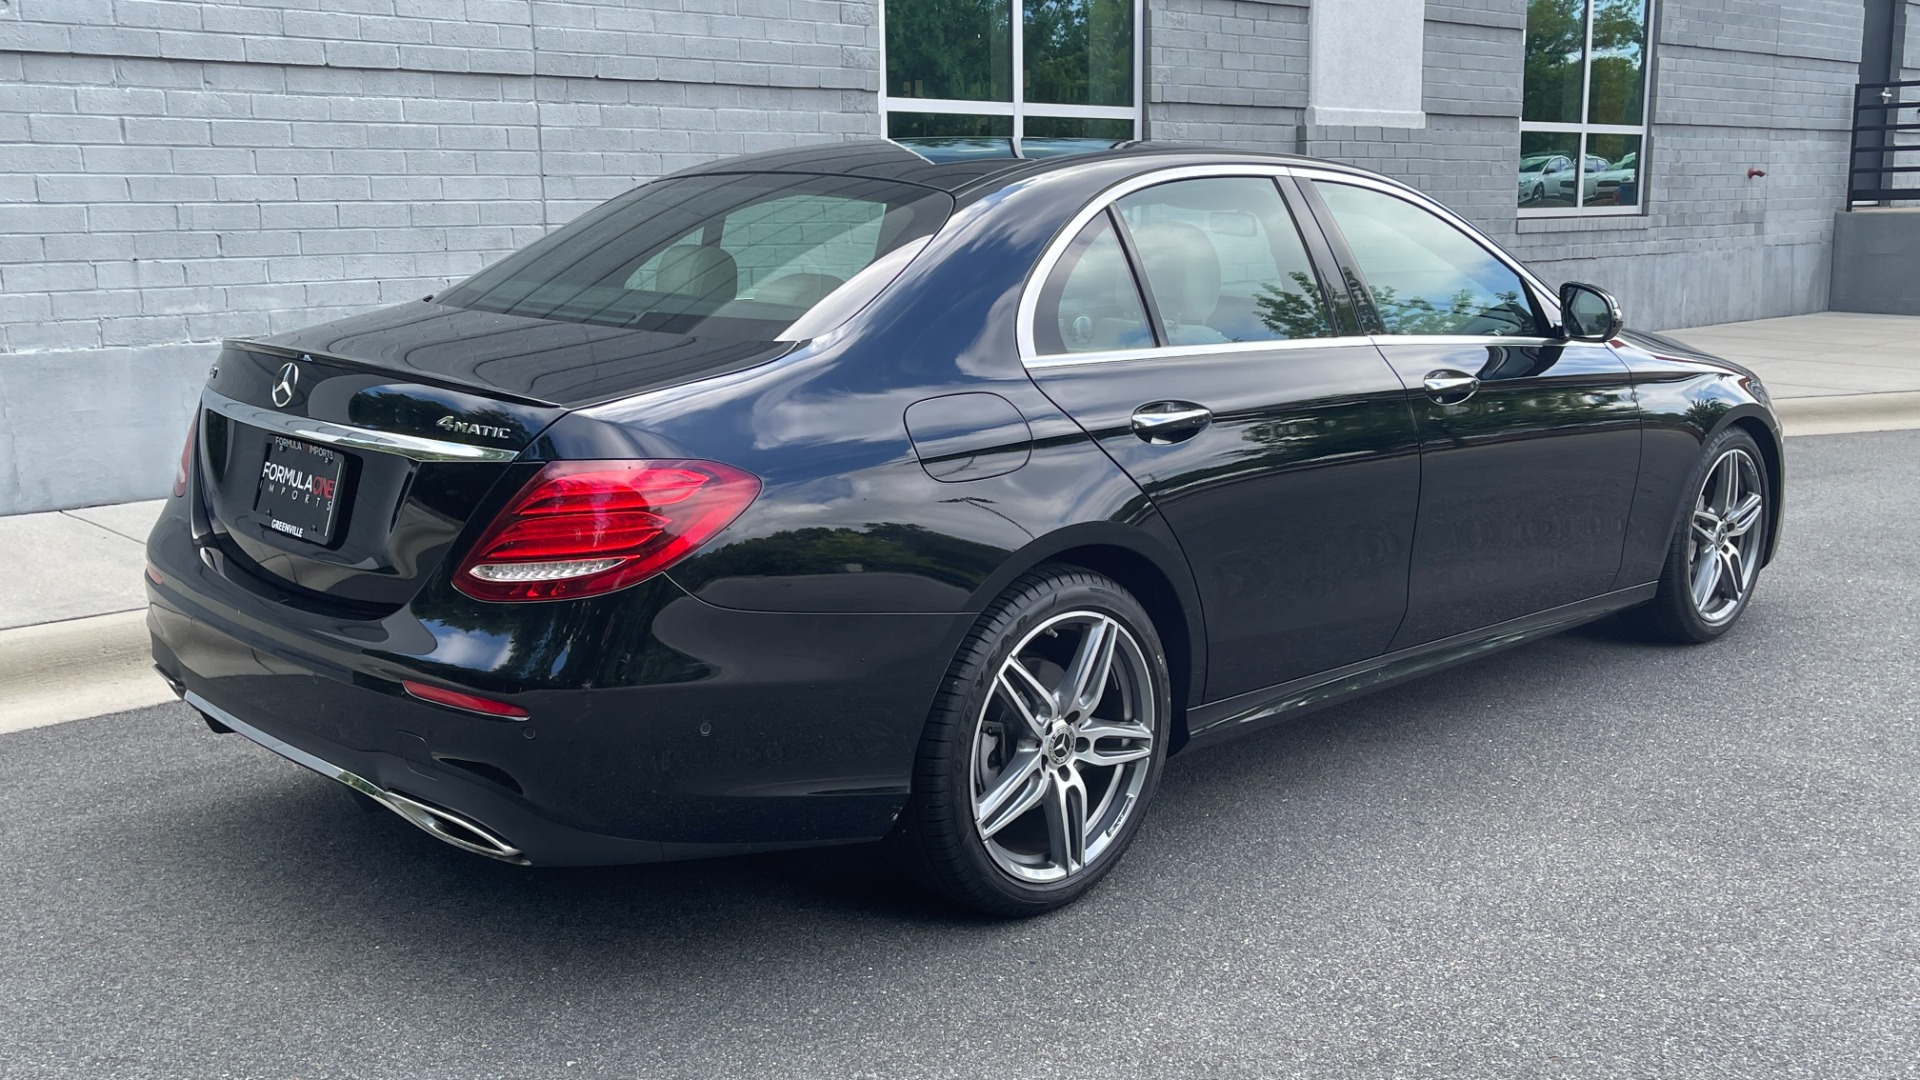 Used 2020 Mercedes-Benz E-Class E 350 / 4MATIC / AMG LINE / BURMESTER SOUND / PANORAMIC ROOF for sale $52,999 at Formula Imports in Charlotte NC 28227 6